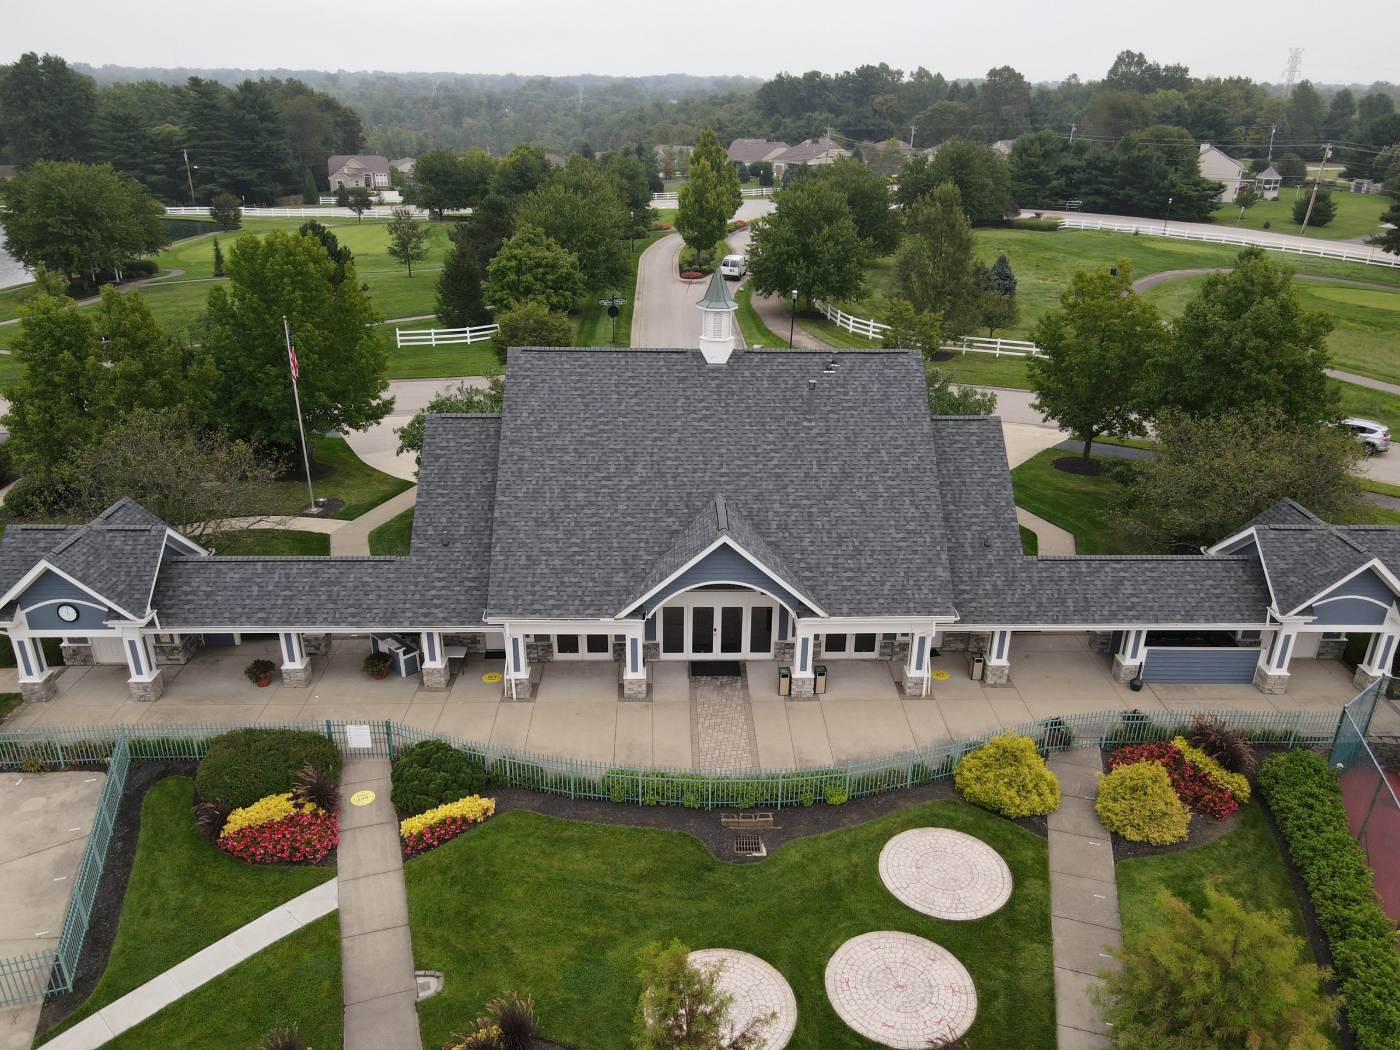 A drone view of a country club building with new roof shingles